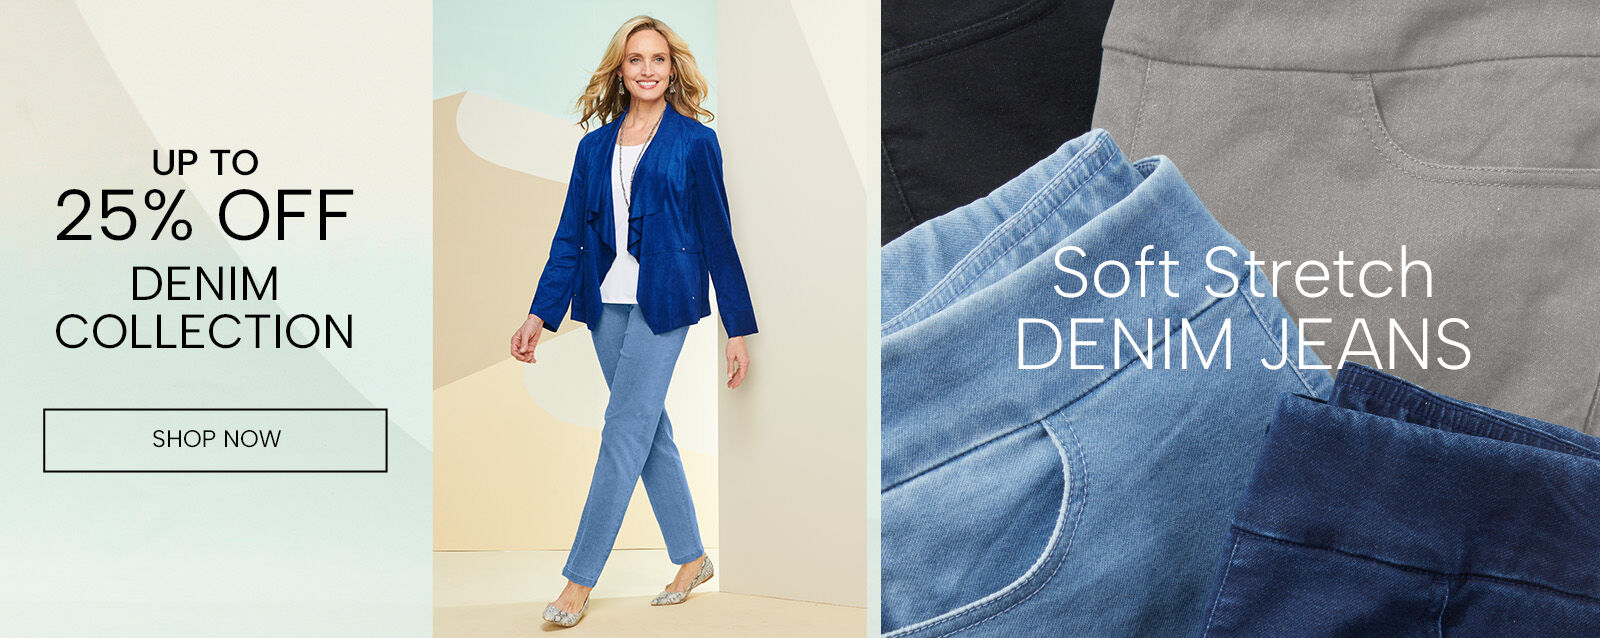 up to 25% off denim collection. Shop now